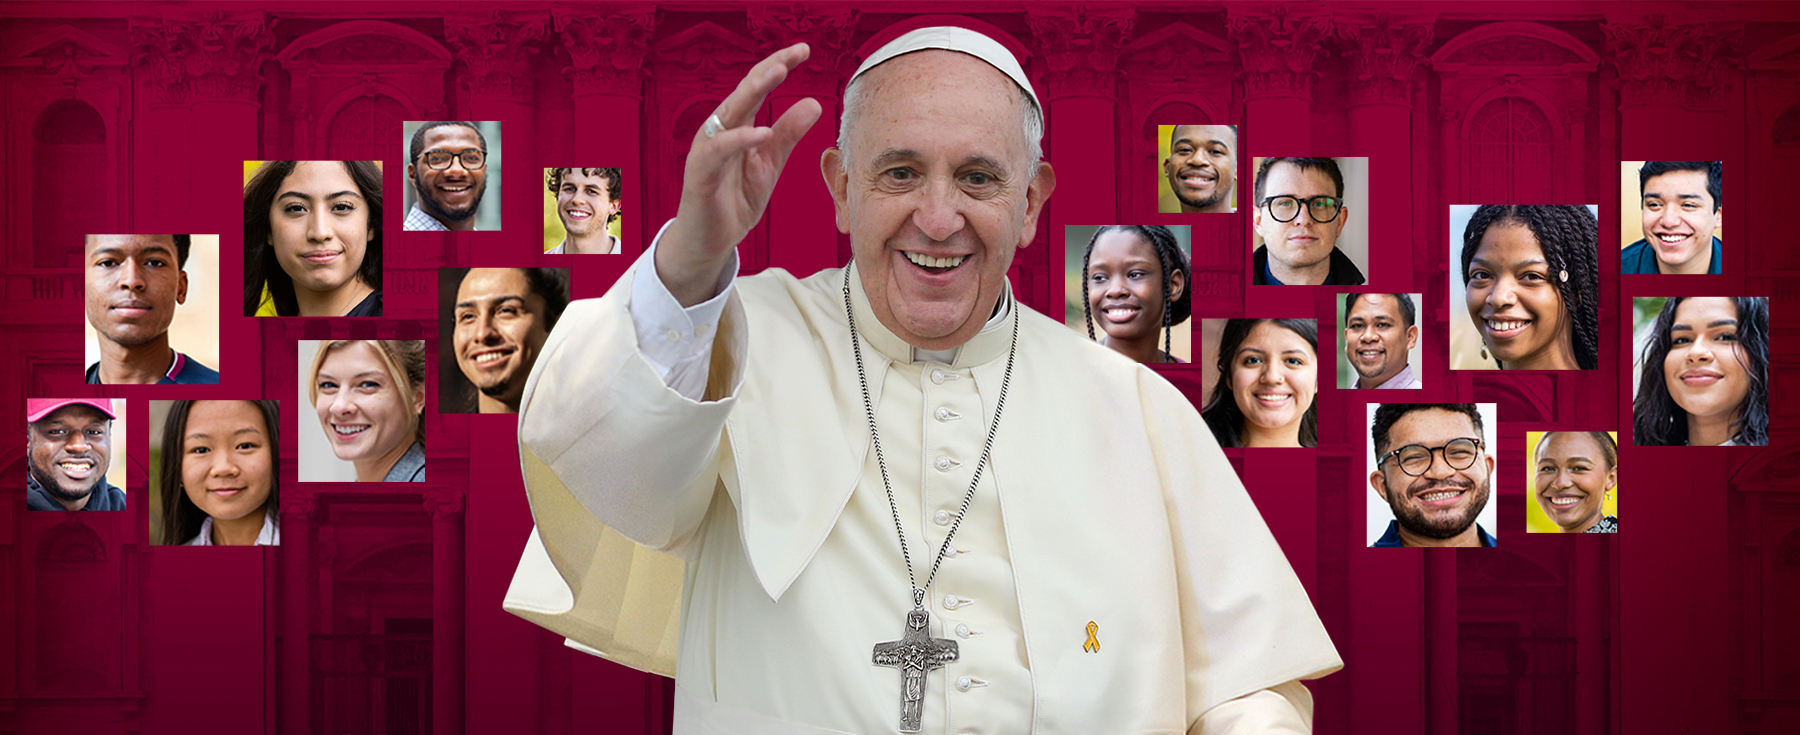 Student Synod with Pope Francis